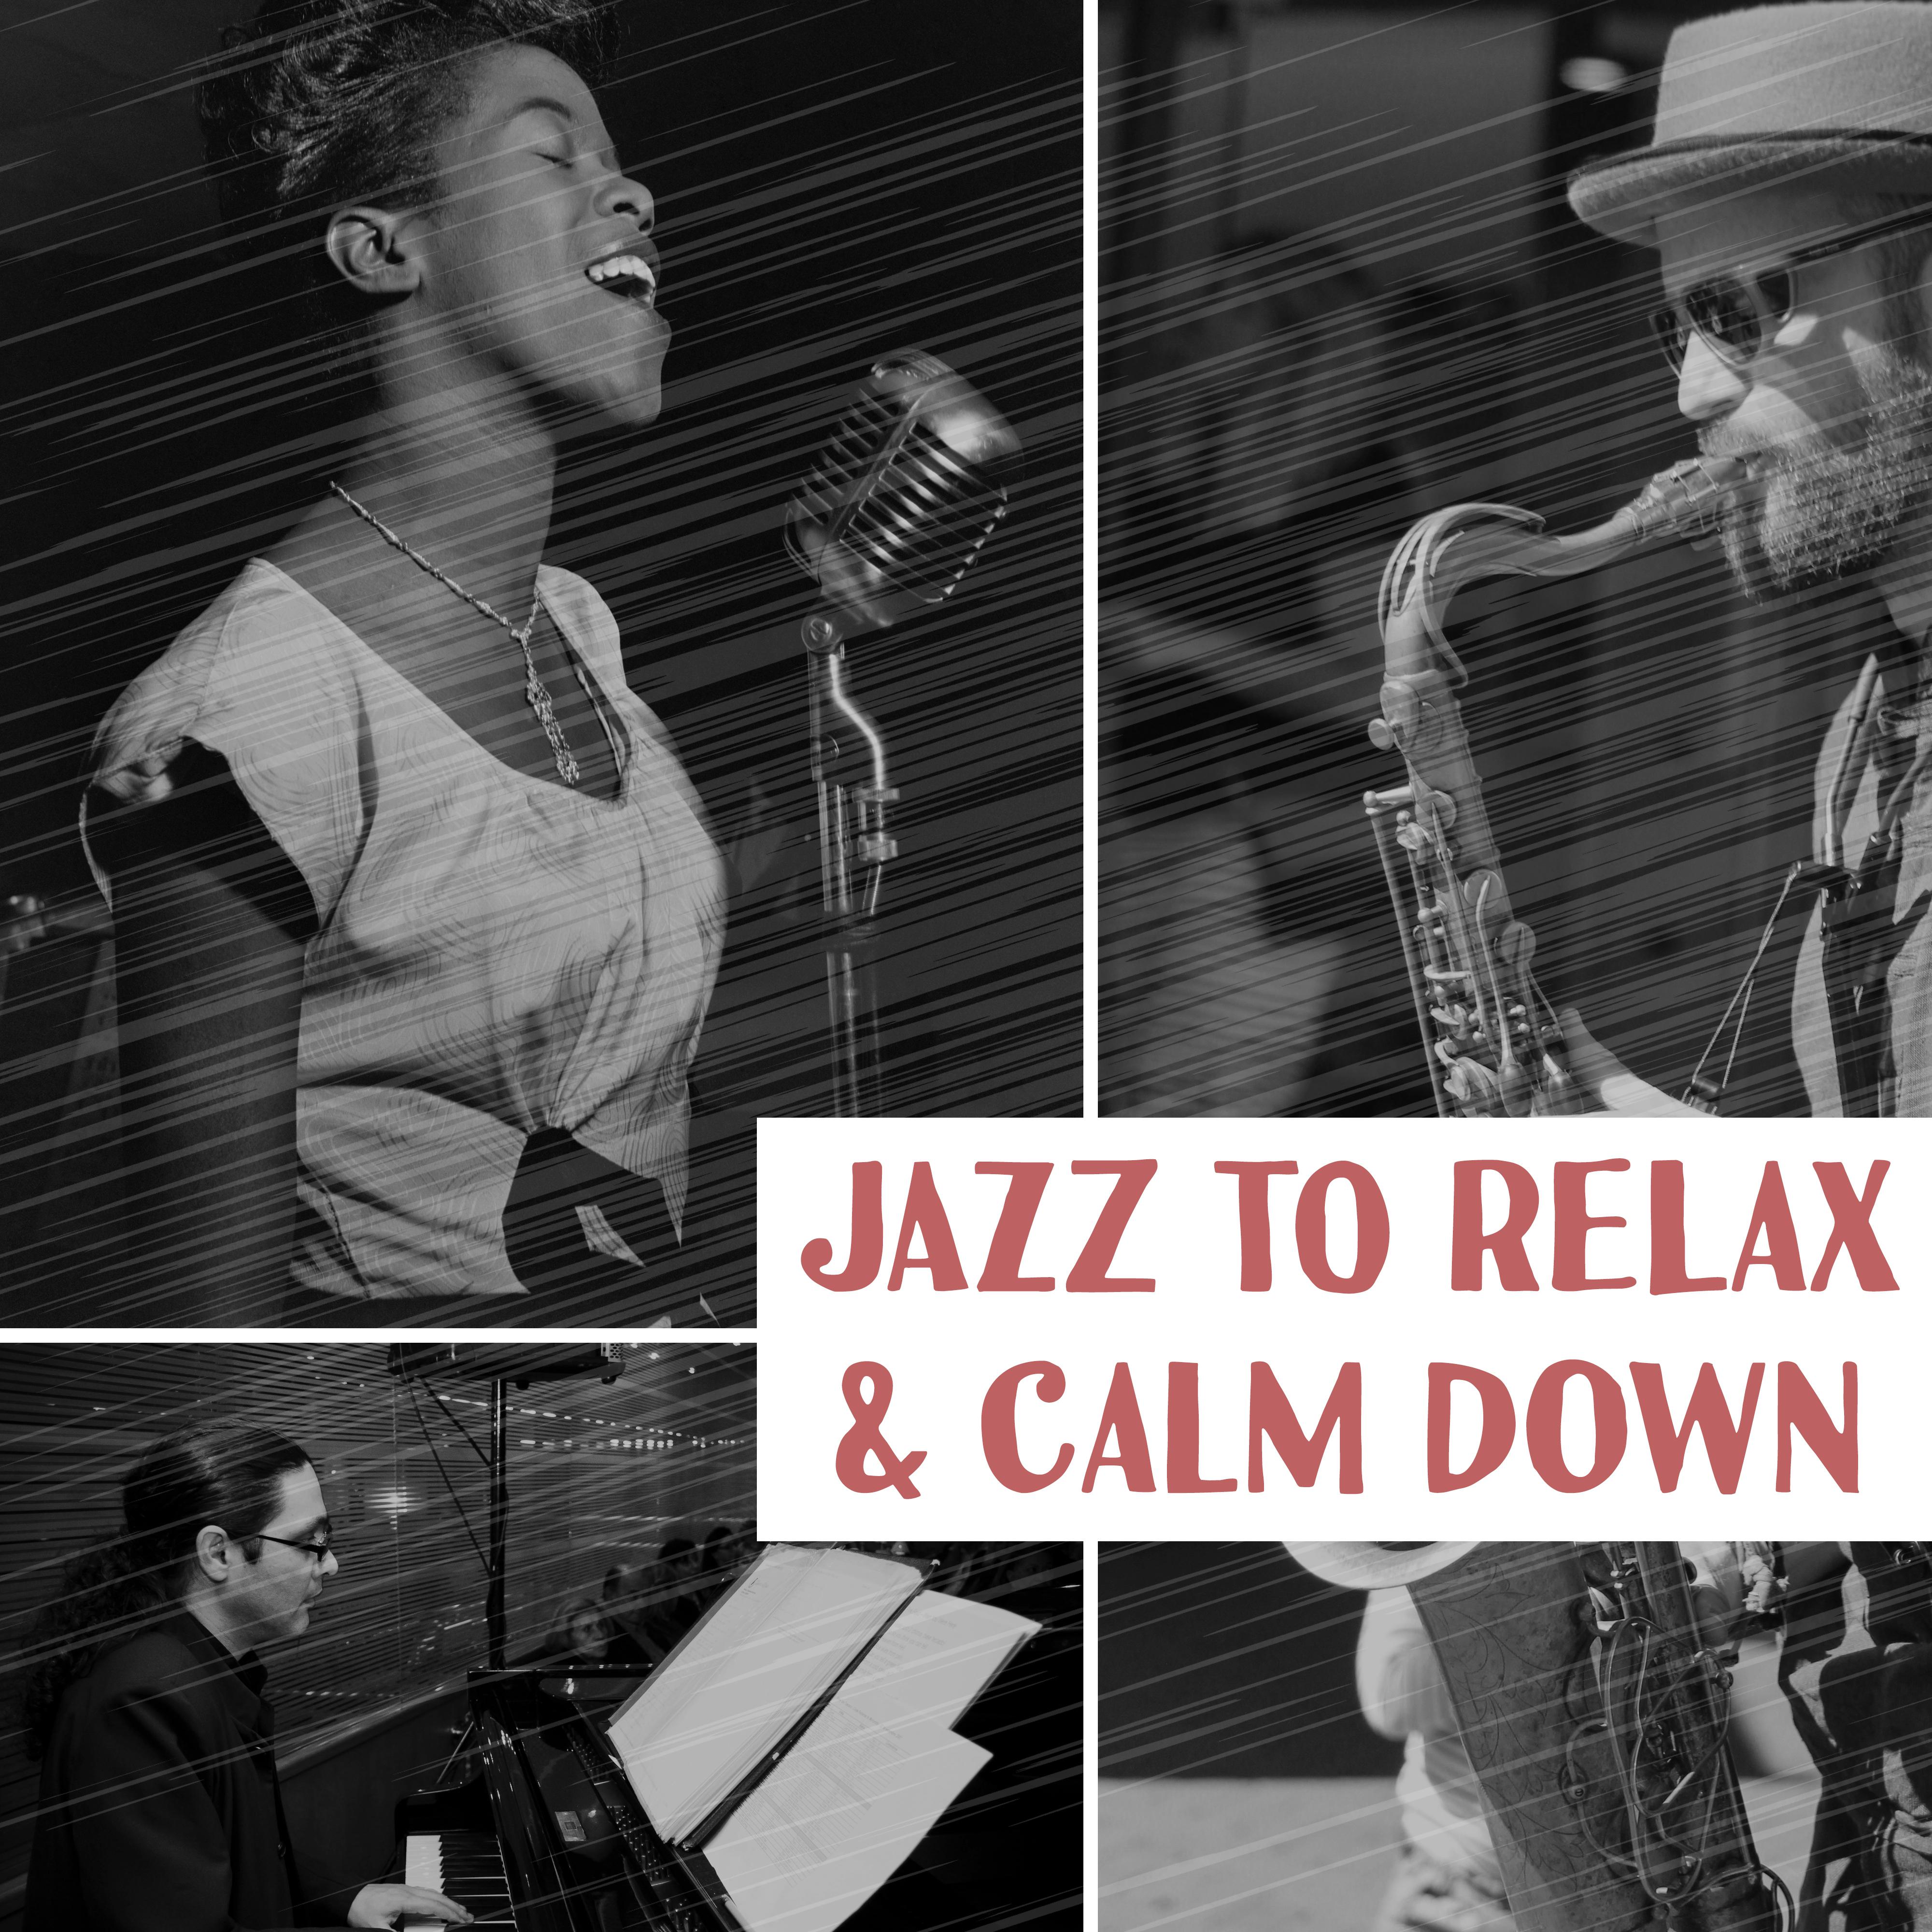 Jazz to Relax  Calm Down  Easy Listening Piano Jazz, Bossa Lounge, Peaceful Sounds, Smooth Music